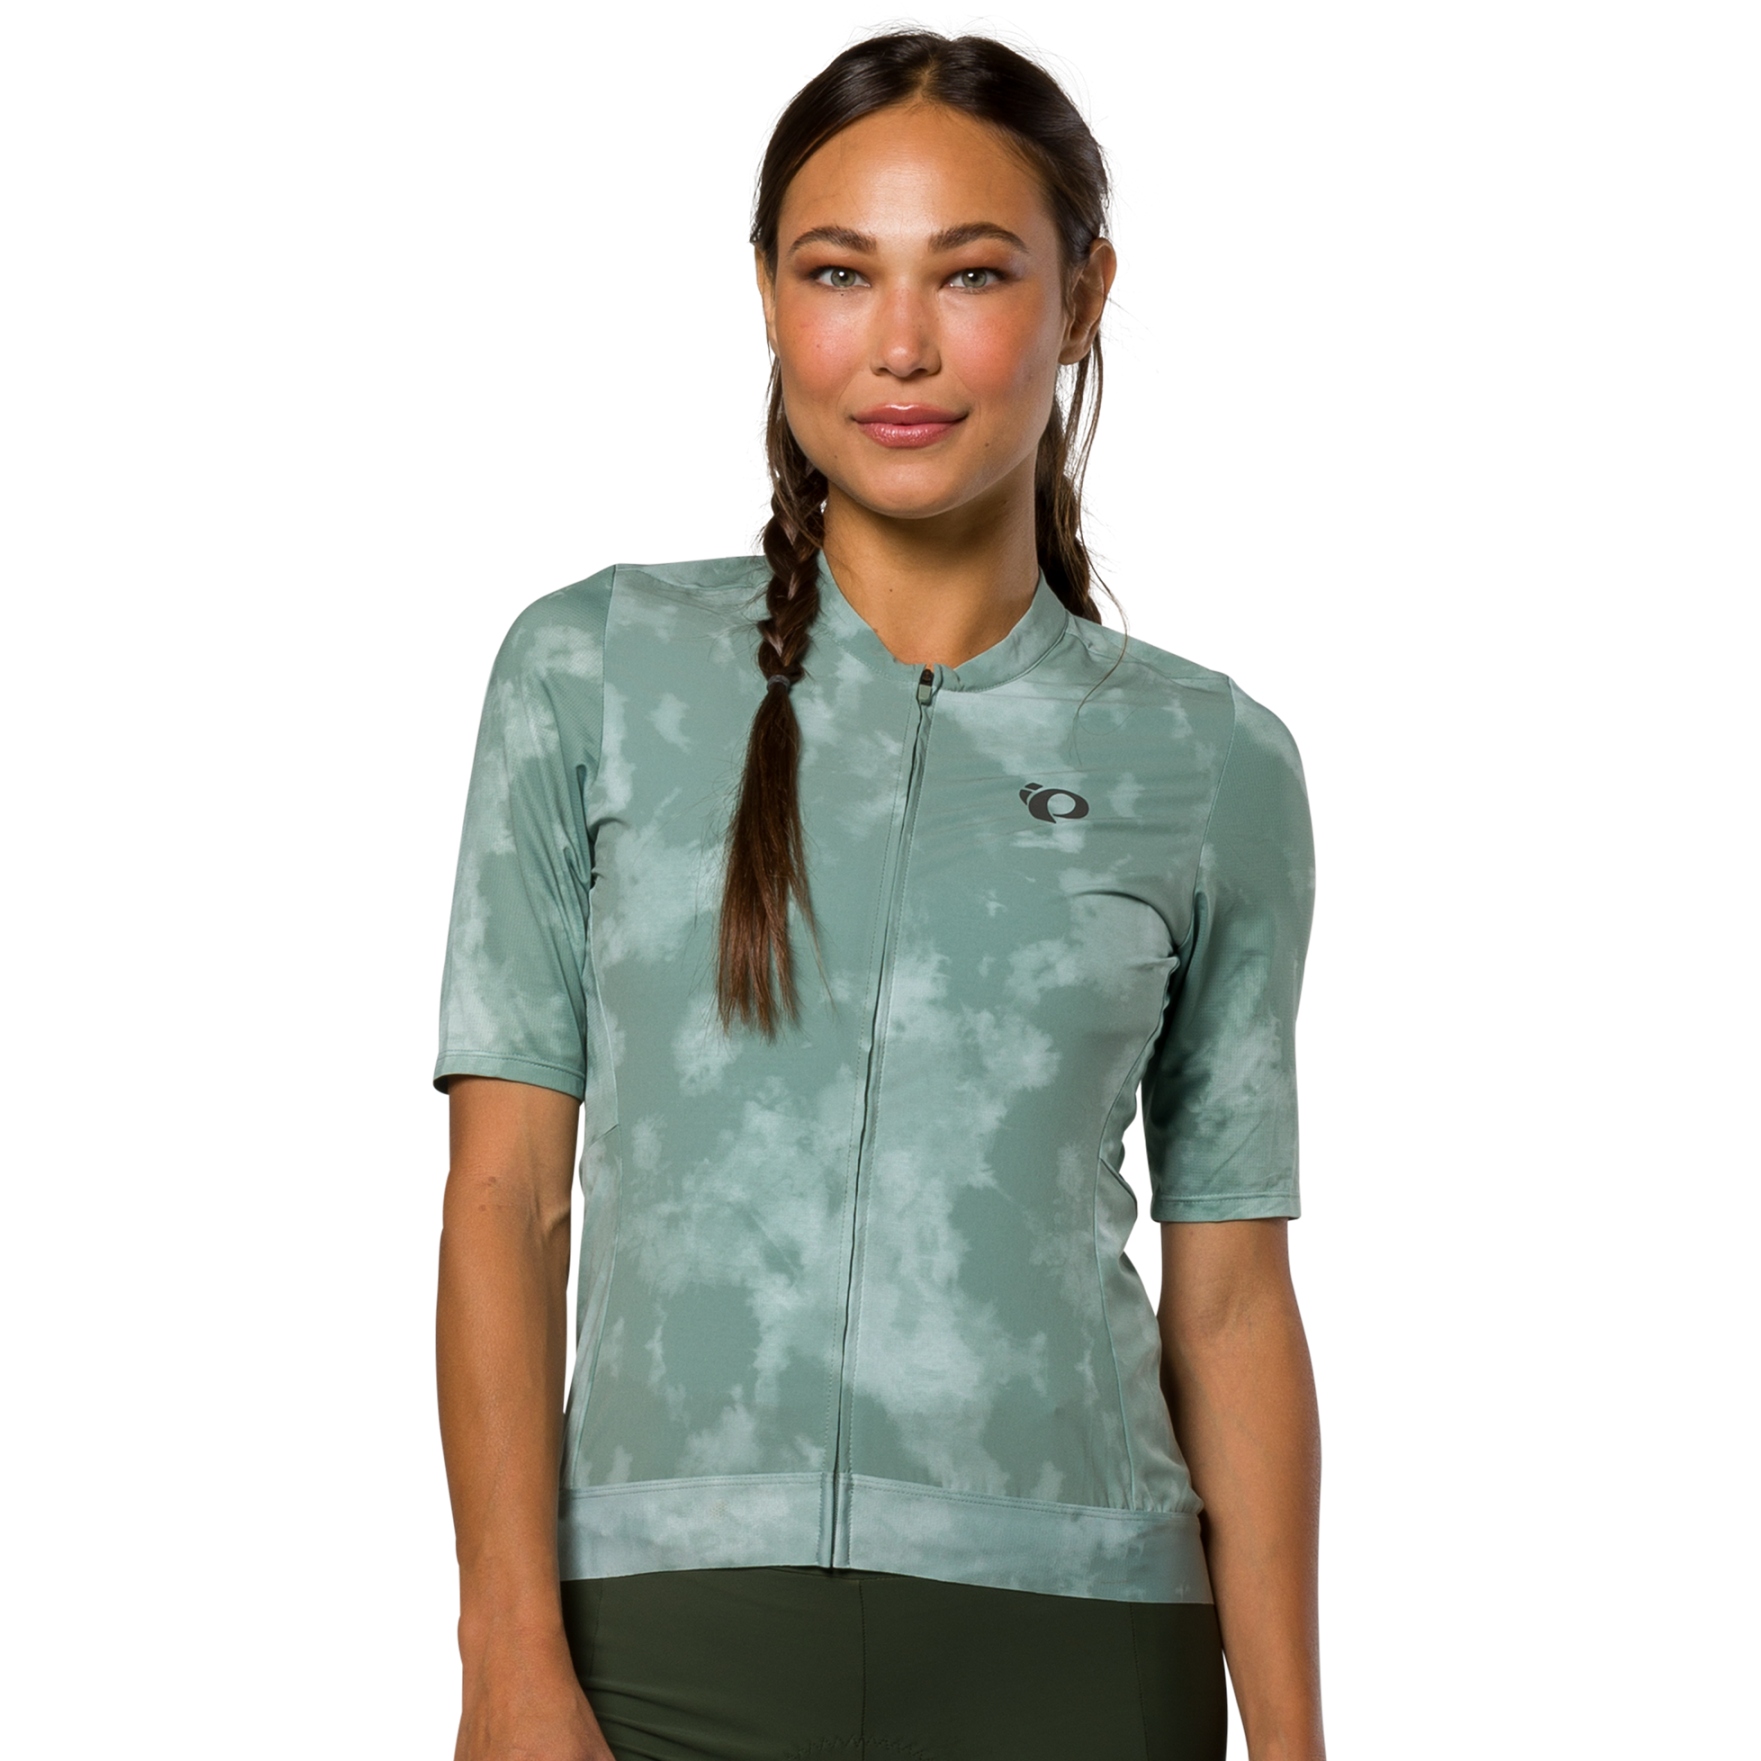 Image of PEARL iZUMi Expedition Gravel Shortsleeve Jersey Women 11222415 - green bay spectral - AAM